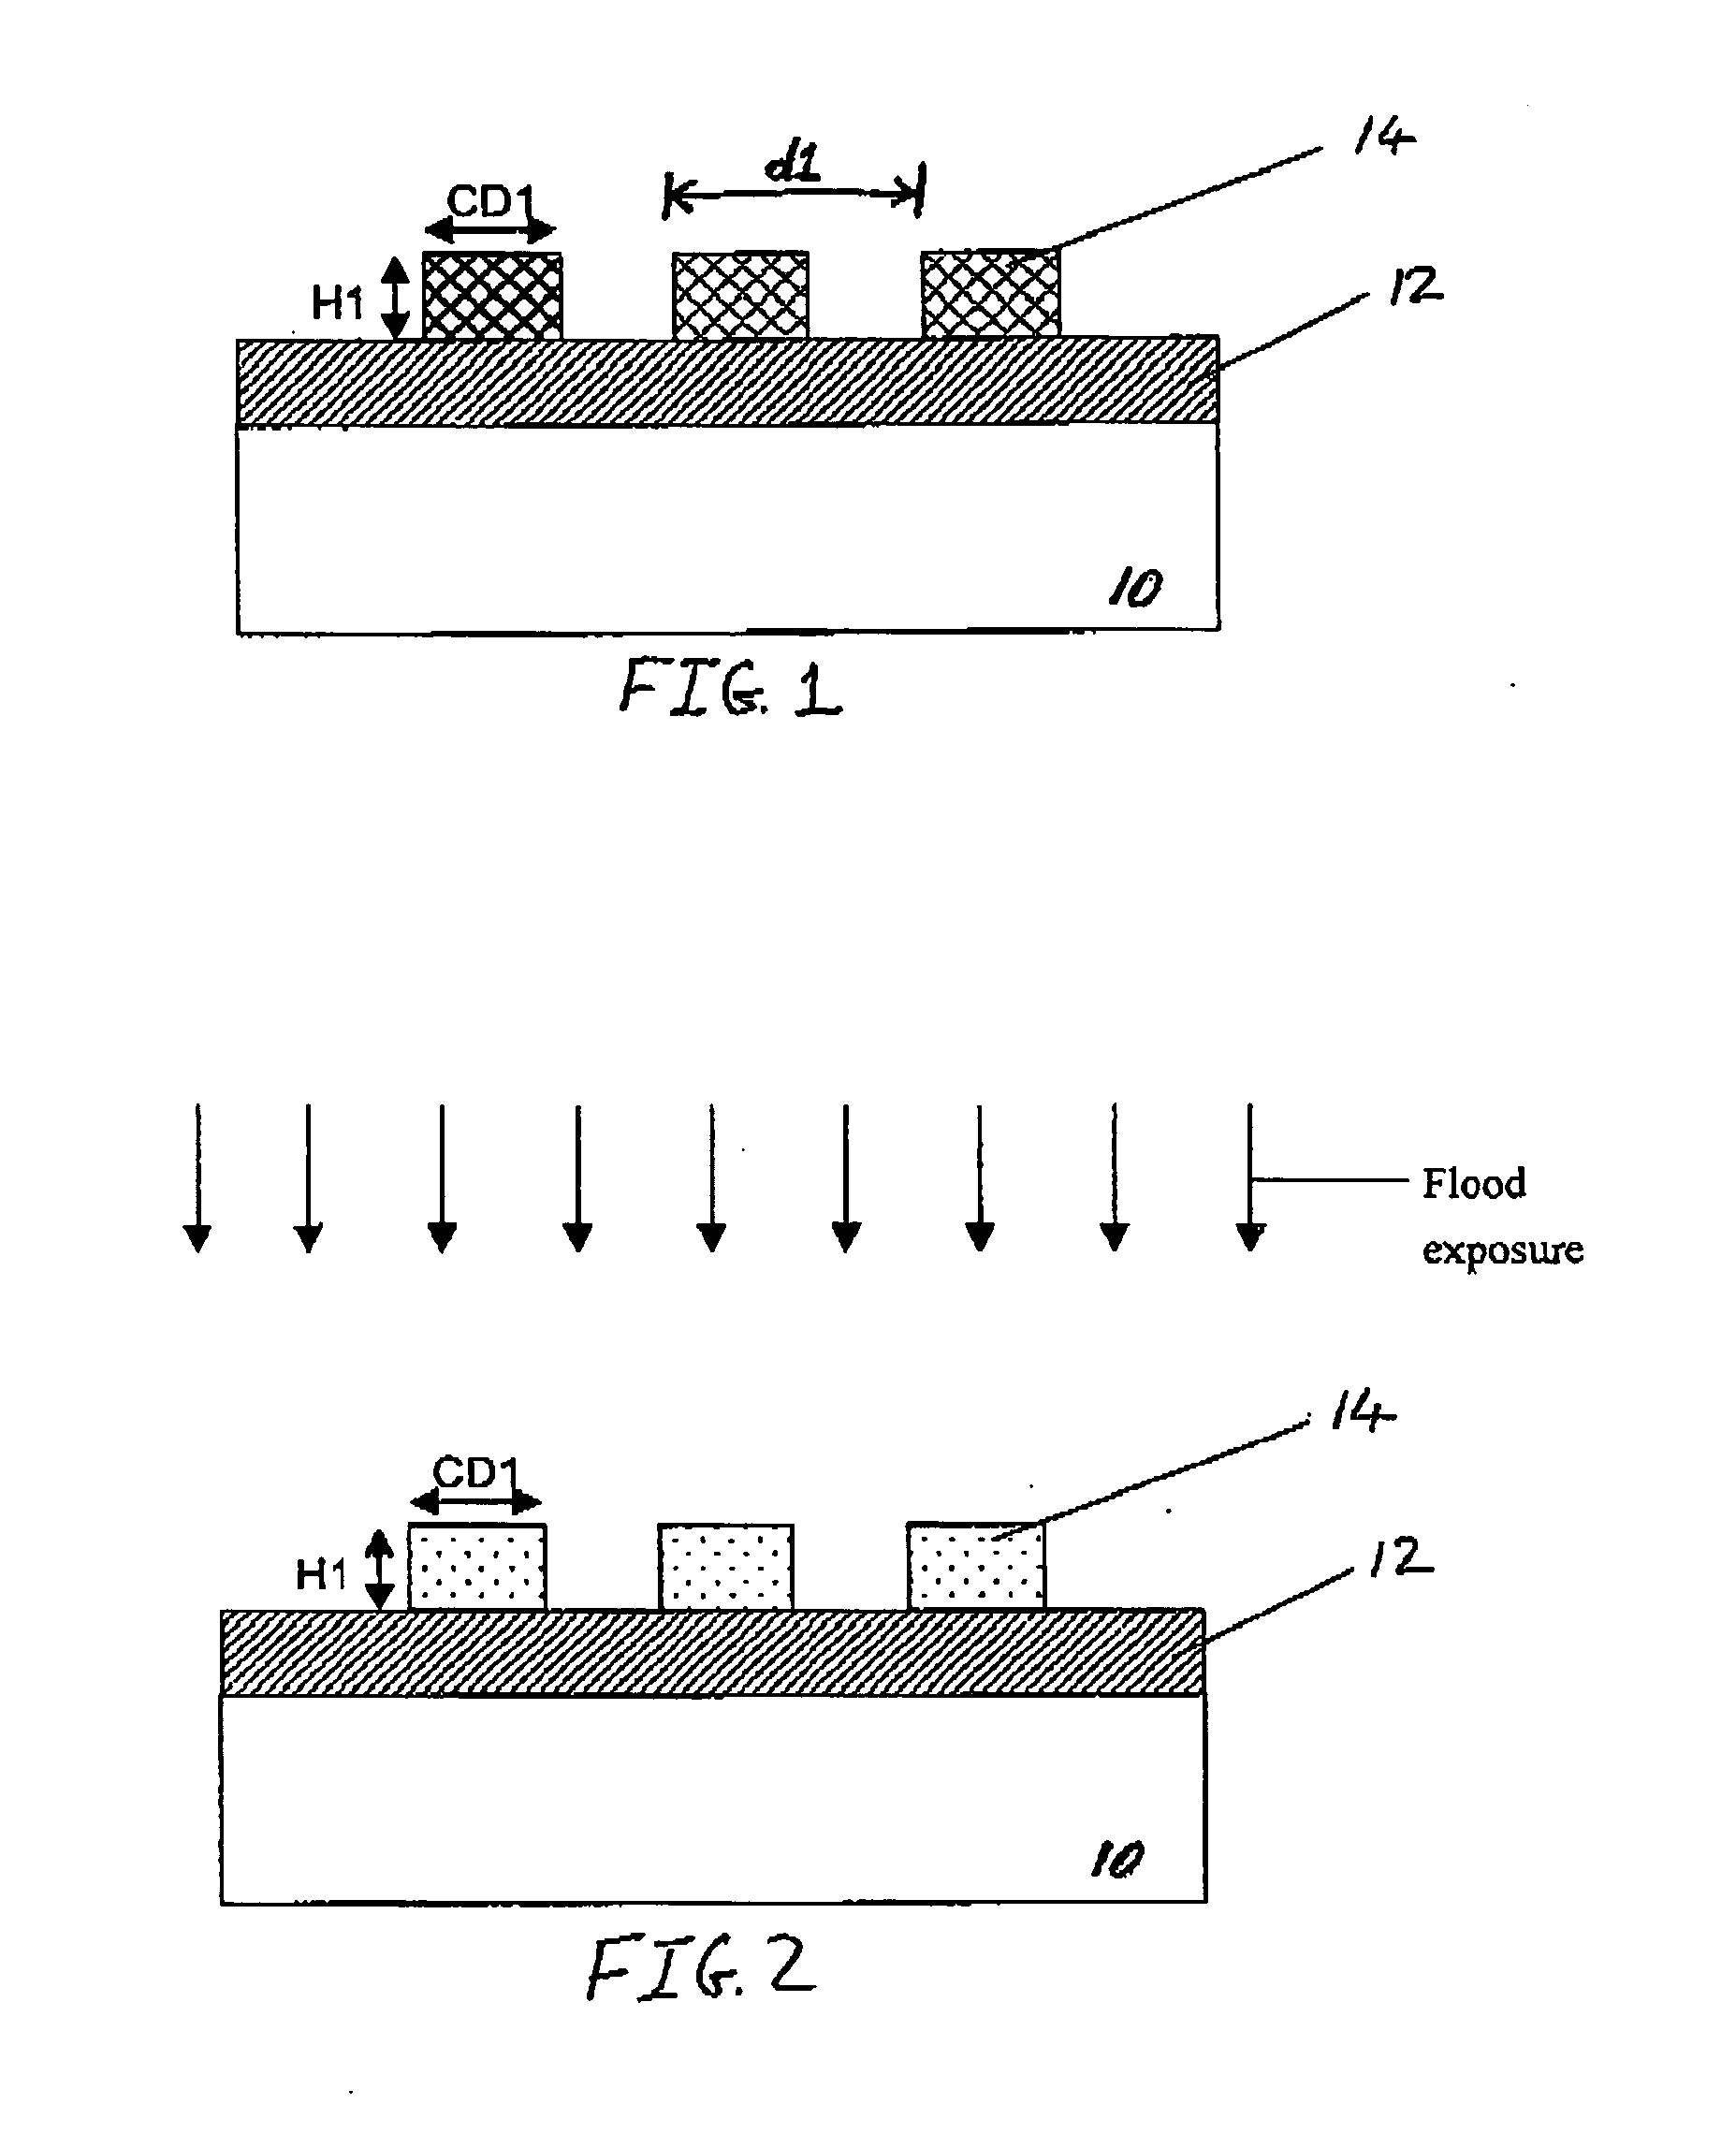 Methods for using a silylation technique to reduce cell pitch in semiconductor devices